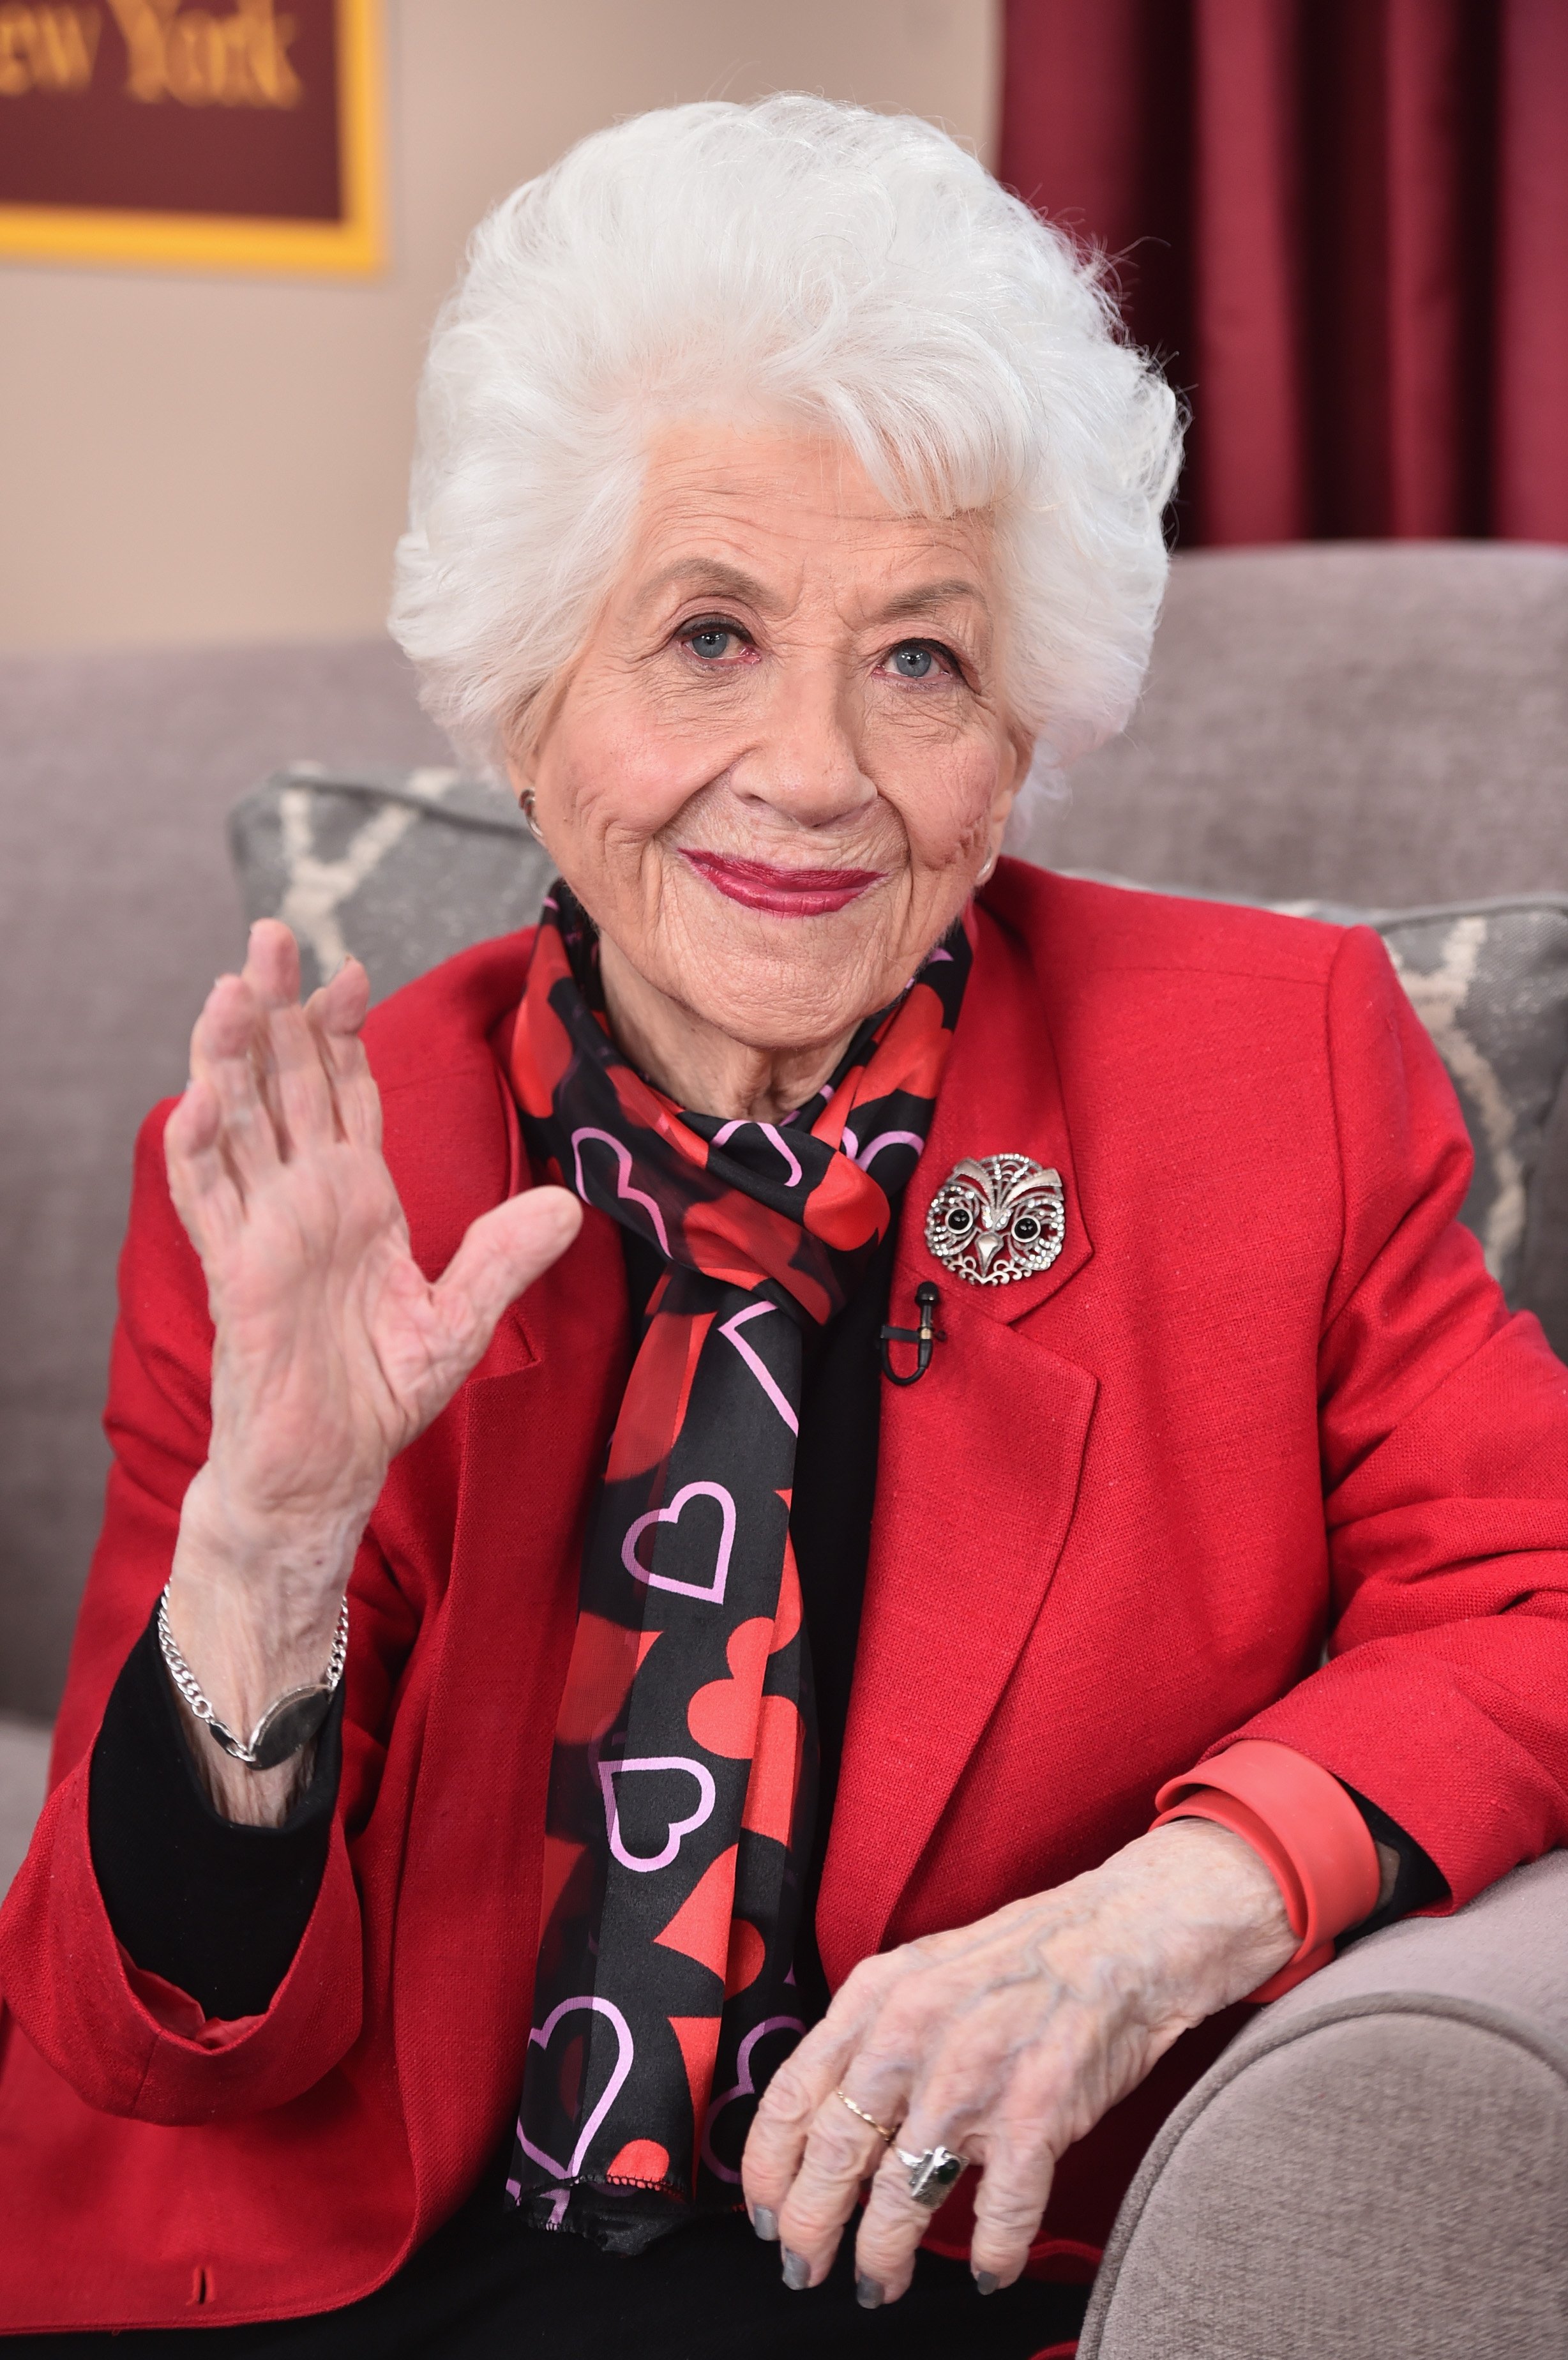 Charlotte Rae at Hallmark's Home and Family "Facts Of Life Reunion" on February 12, 2016 in Universal City, California.| Photo: Getty Images